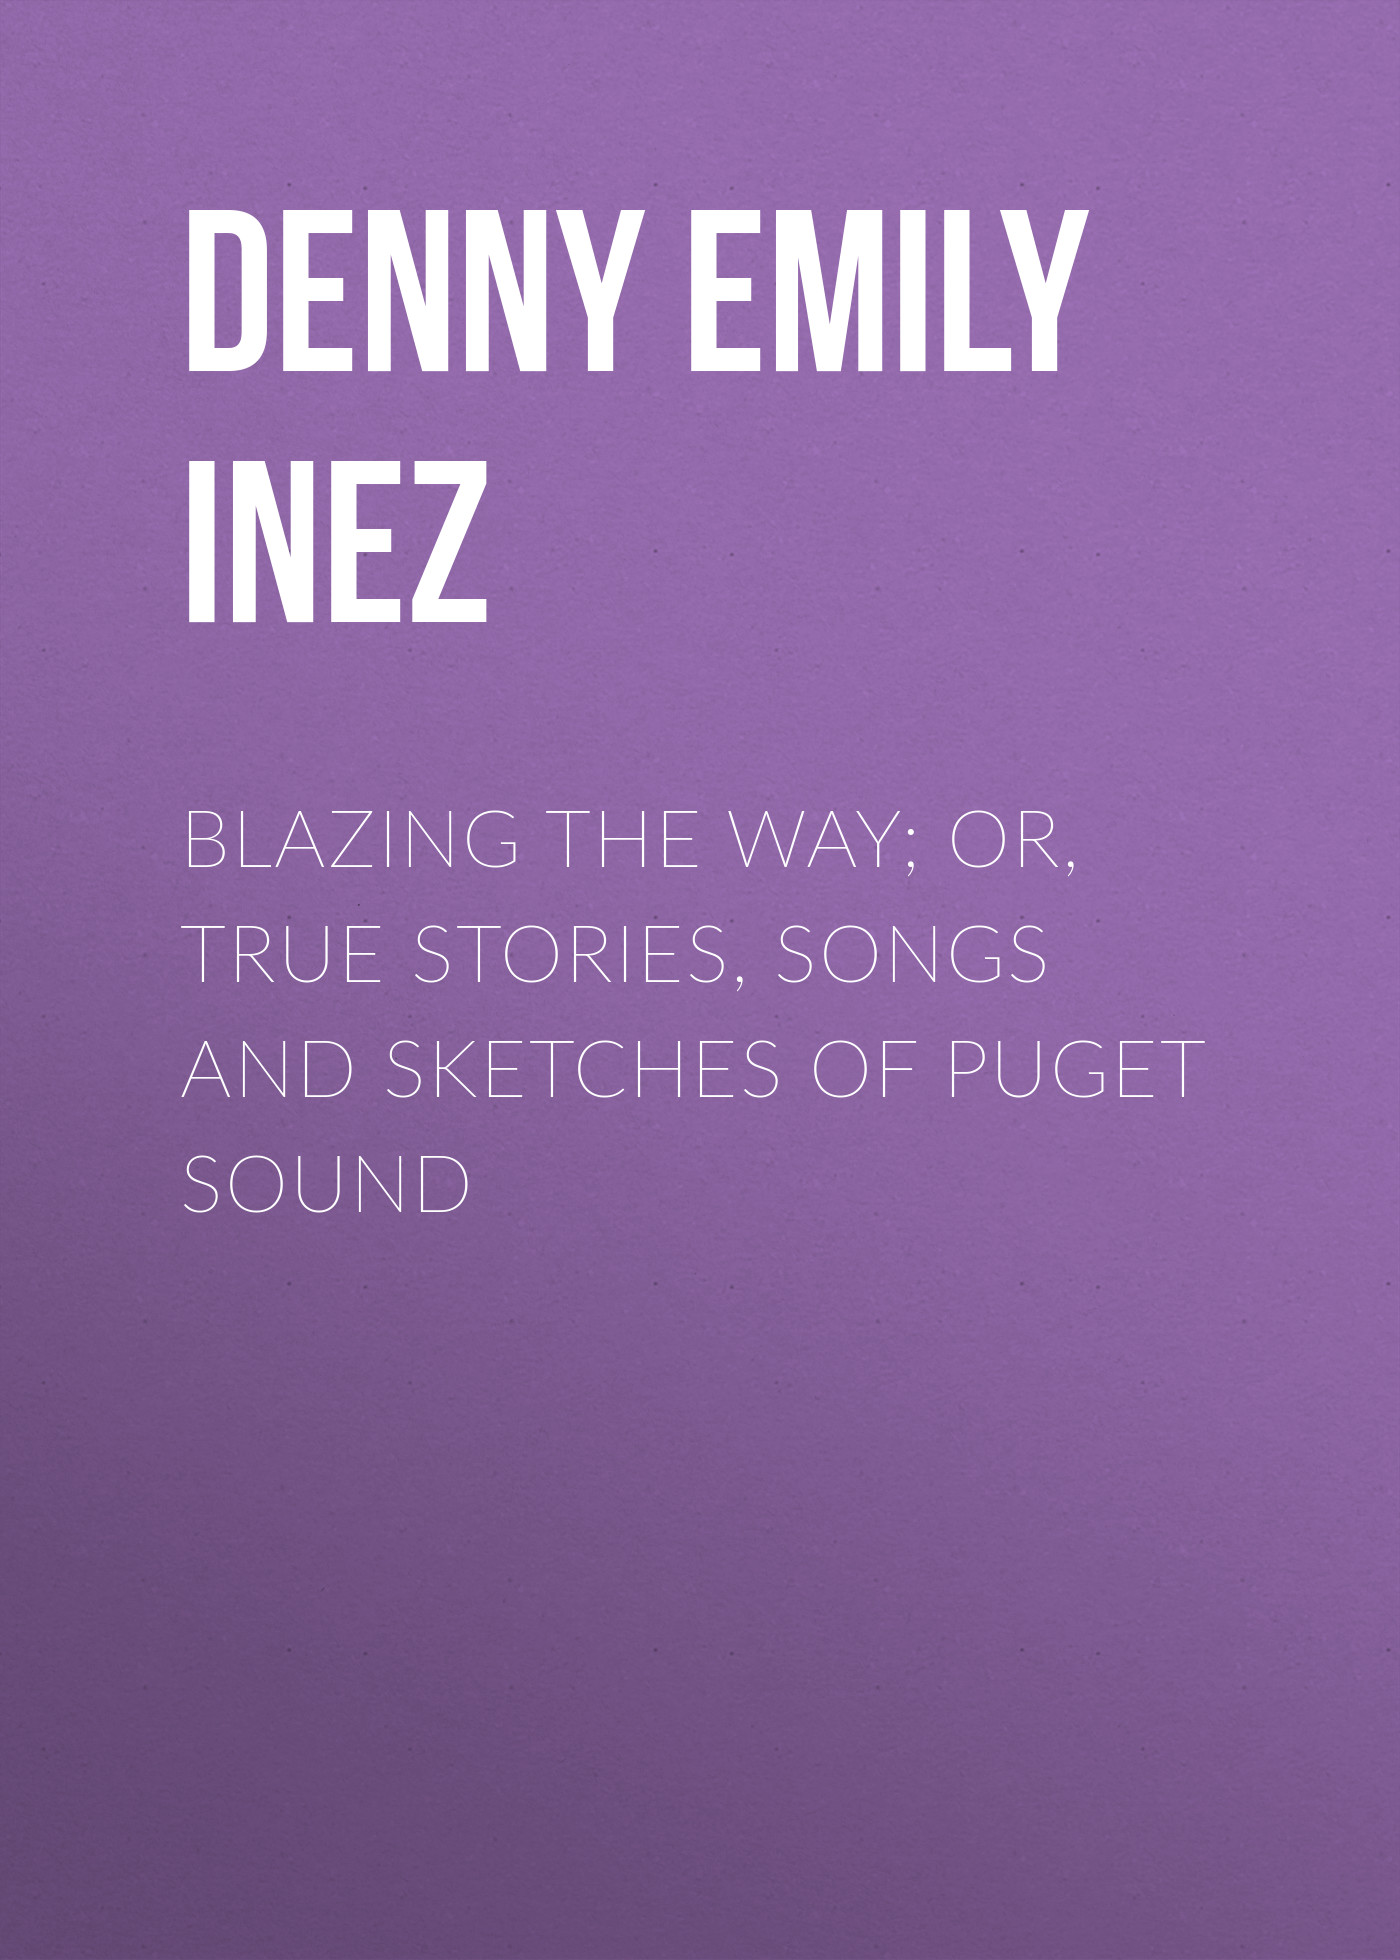 Denny Emily Inez Blazing the Way; Or, True Stories, Songs and Sketches of Puget Sound